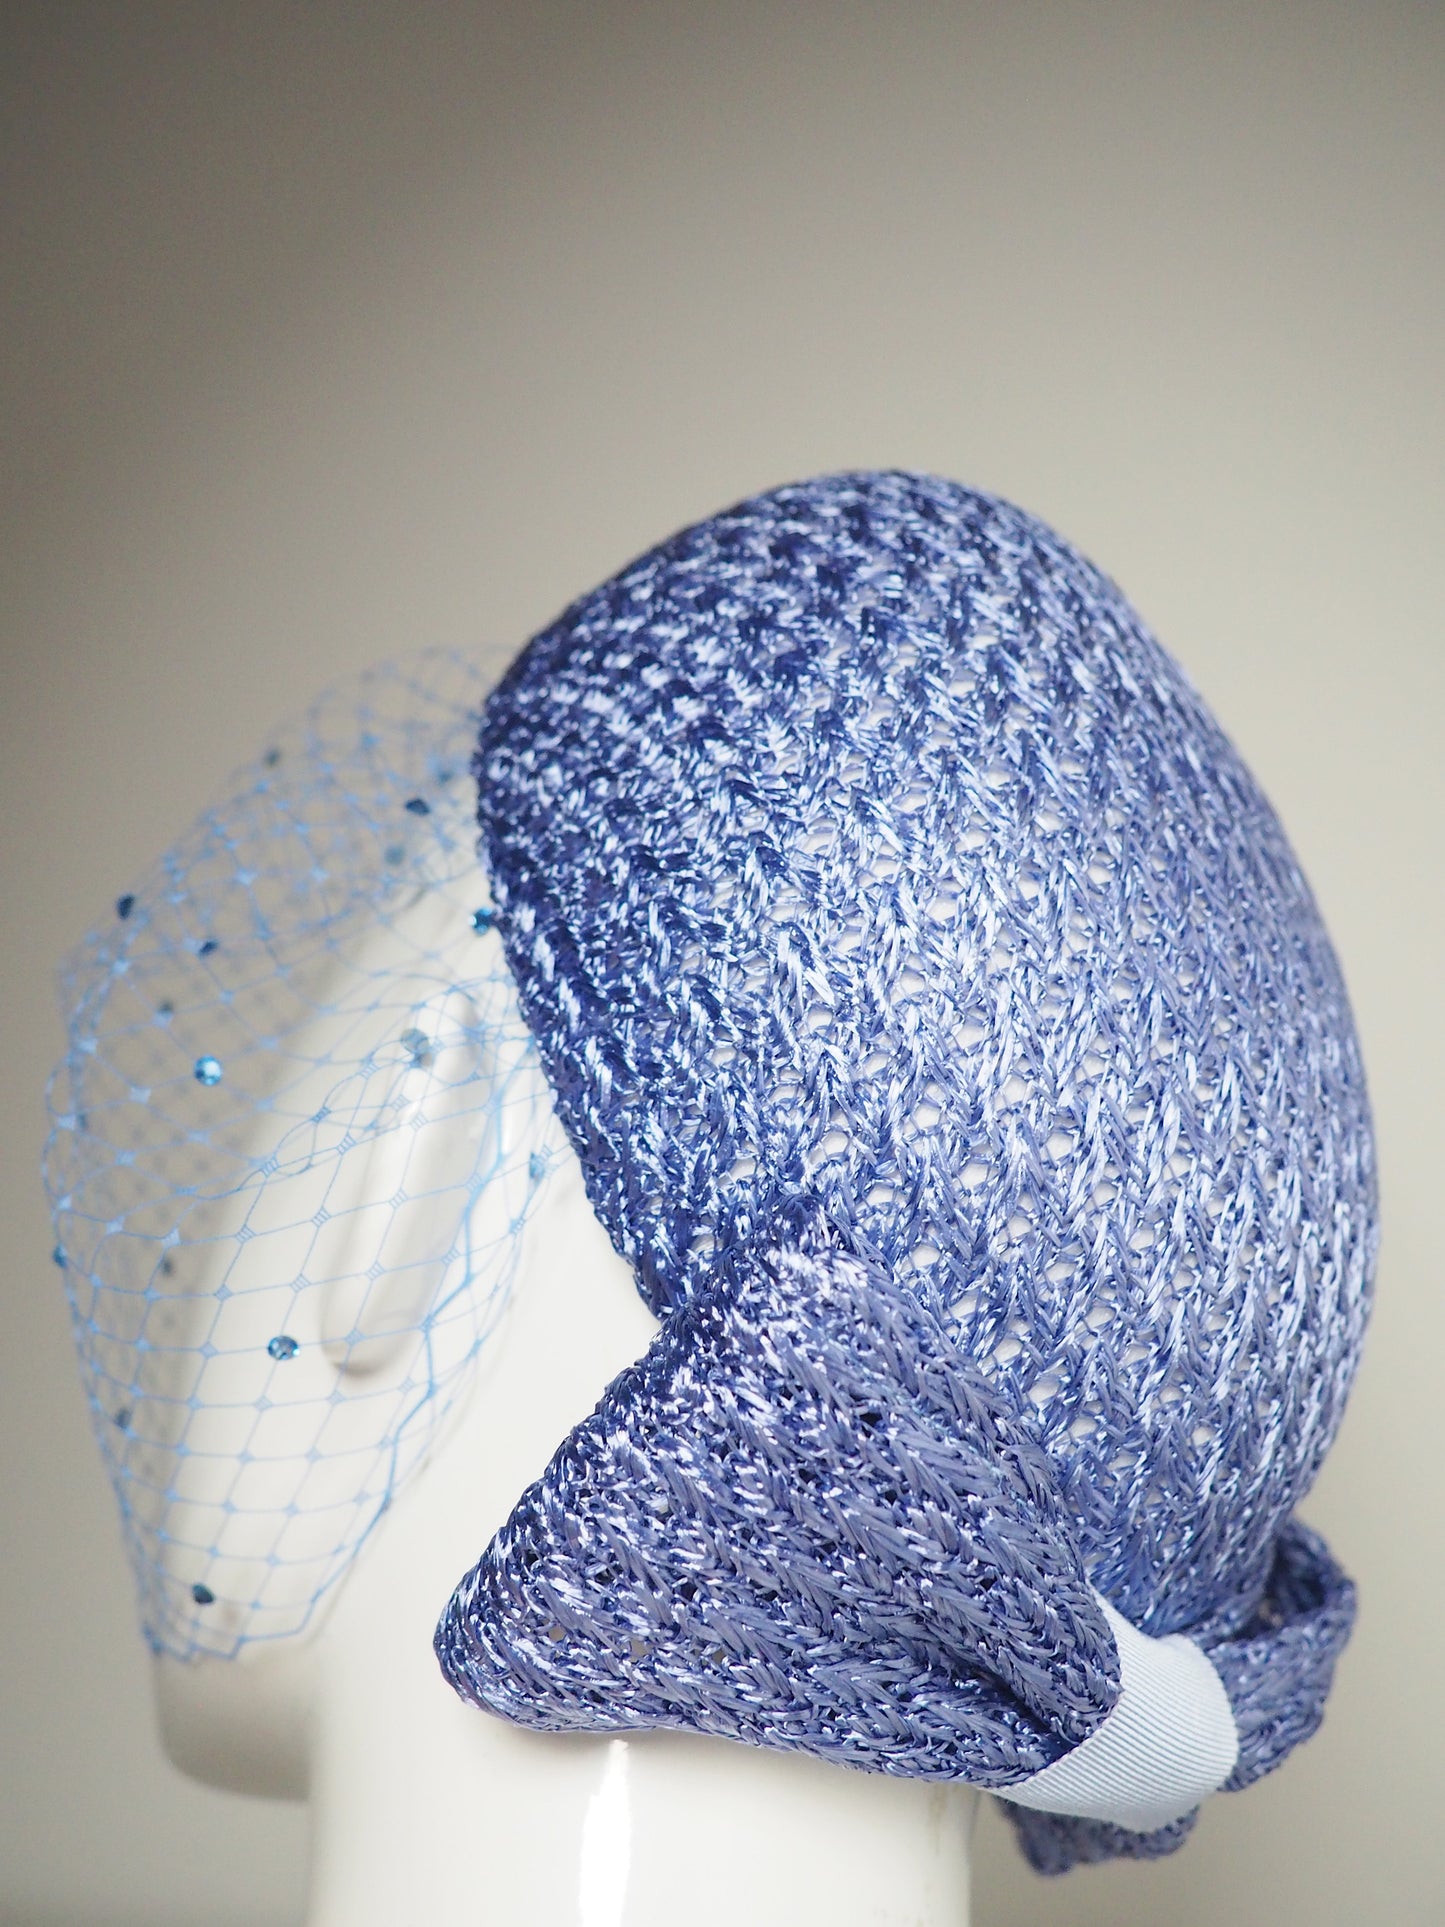 Pretty Little Thing - Periwinkle vintage straw pillbox with bow detail and ceylon sapphire crystal embellished veil